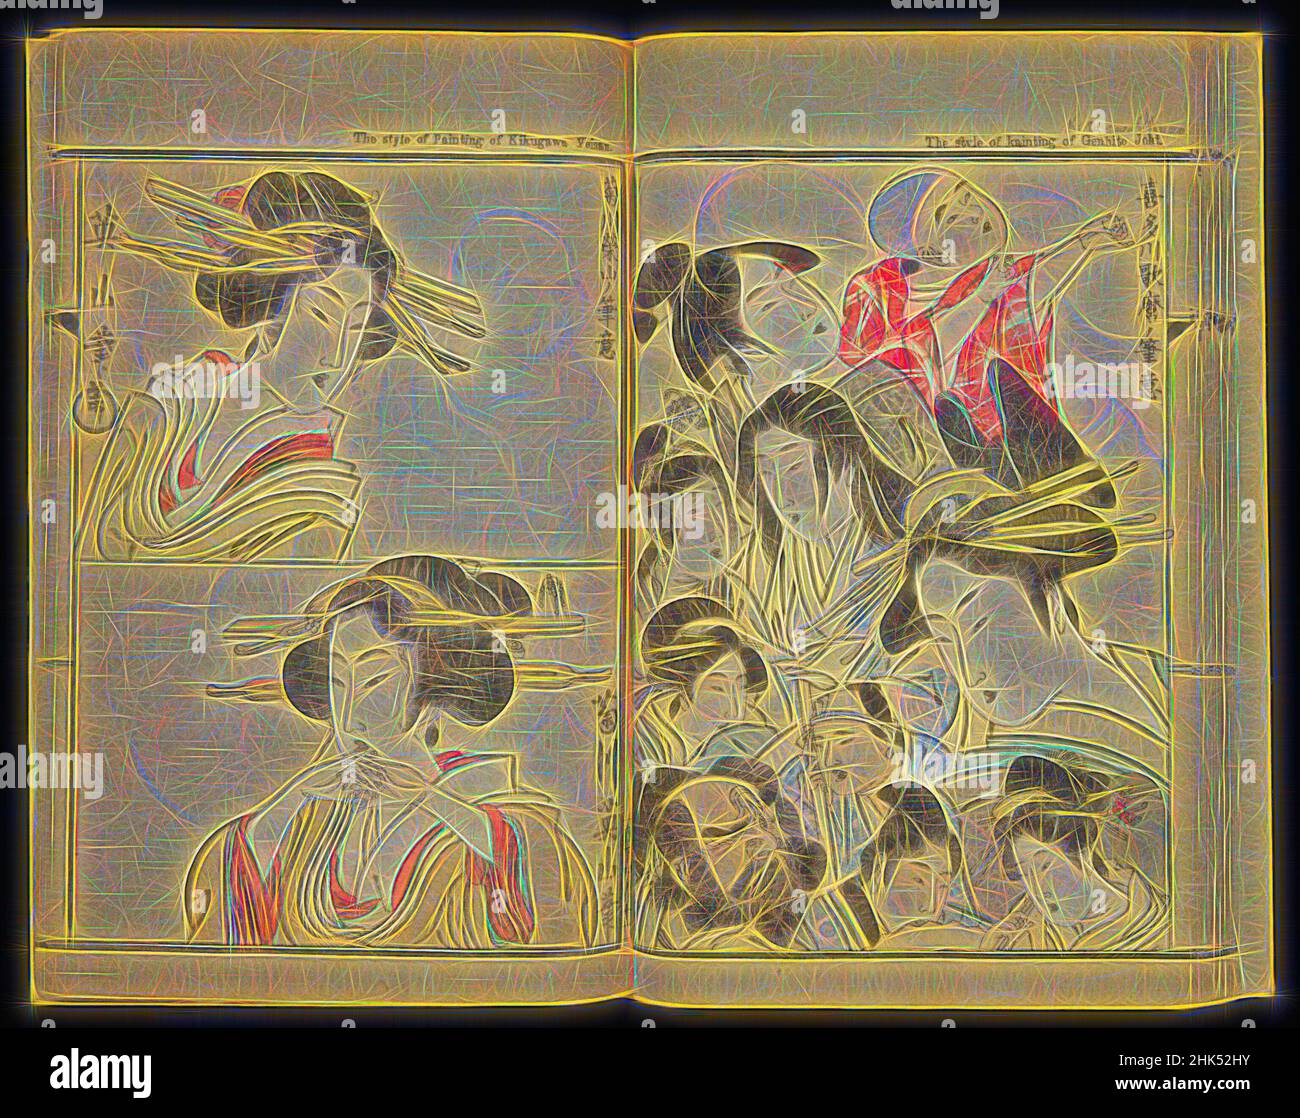 Inspired by Kyosai Kadan Nihen, Pictorial Accounts of Kyosai, Part II, Volume 3, Kawanabe Kyosai, Japanese, 1831-1889, Ink and light colors on paper, Japan, 1887, Meiji Period, 10 1/16 x 6 15/16 in., 25.6 x 17.6 cm, bijin, bijinga, bilingual, book, boy, codex, drawing, exquisite, illustration, IMLS, Reimagined by Artotop. Classic art reinvented with a modern twist. Design of warm cheerful glowing of brightness and light ray radiance. Photography inspired by surrealism and futurism, embracing dynamic energy of modern technology, movement, speed and revolutionize culture Stock Photo